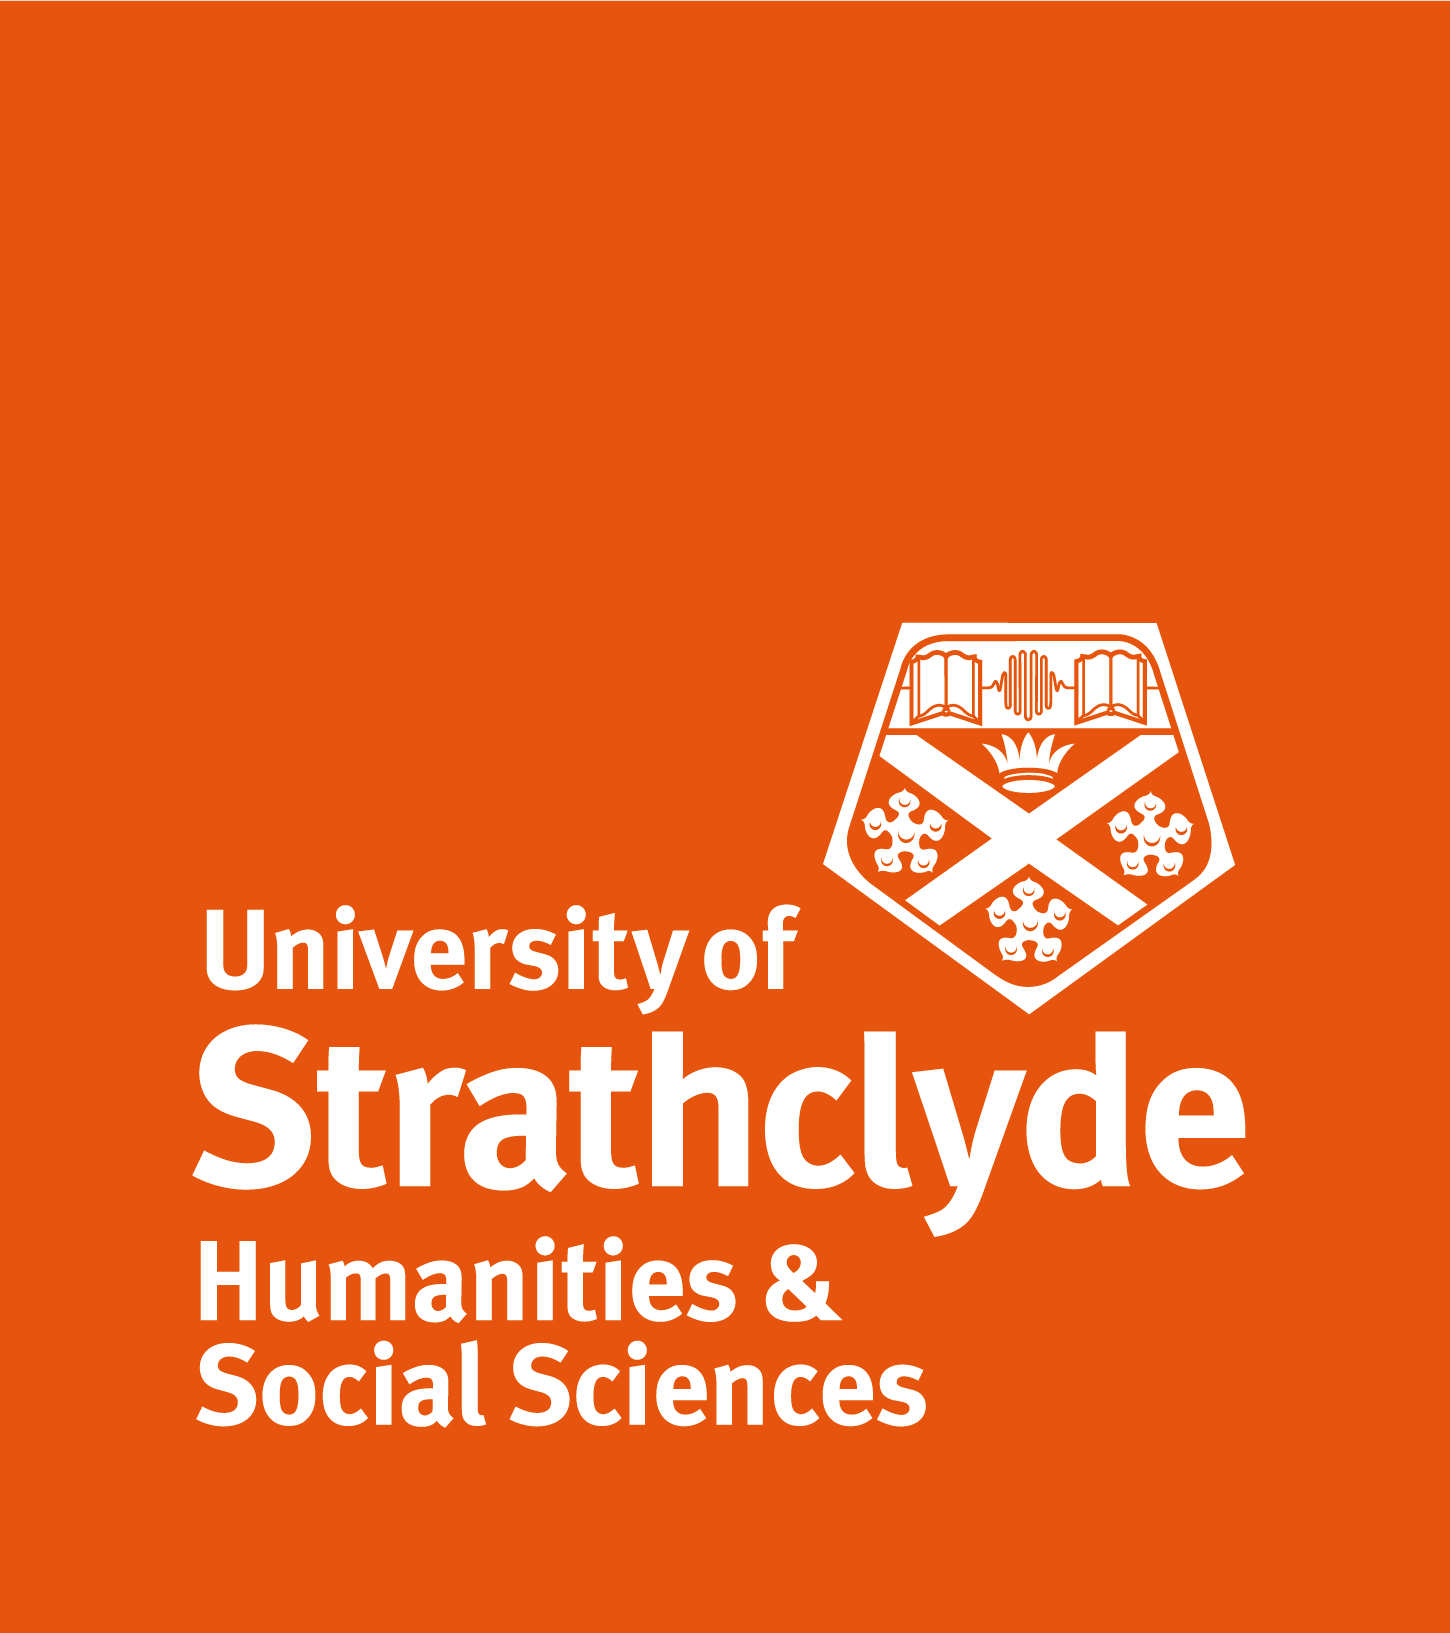 orange background with university logo and university of strathclyde HASS in white